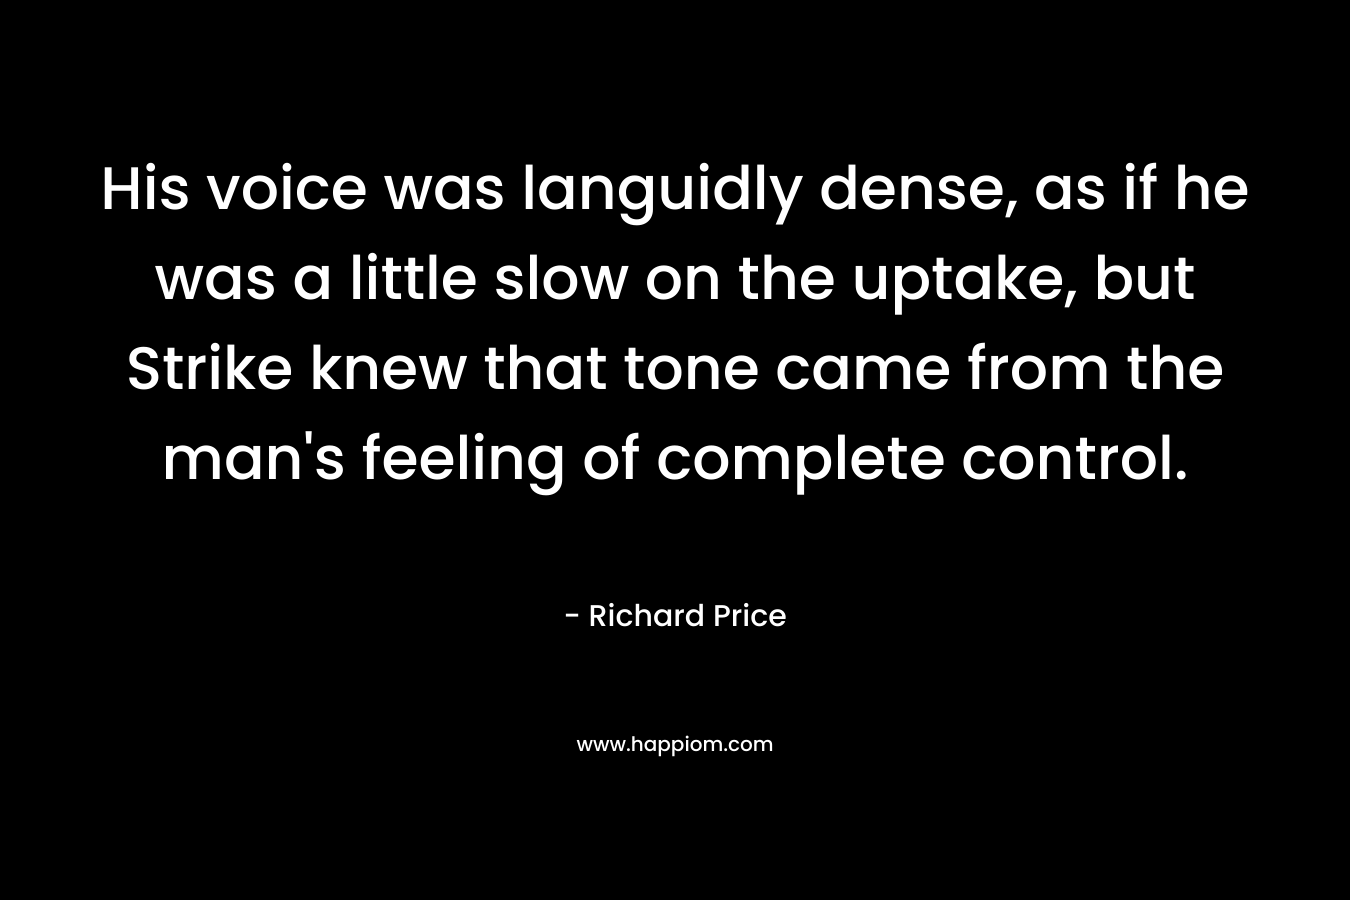 His voice was languidly dense, as if he was a little slow on the uptake, but Strike knew that tone came from the man’s feeling of complete control. – Richard Price